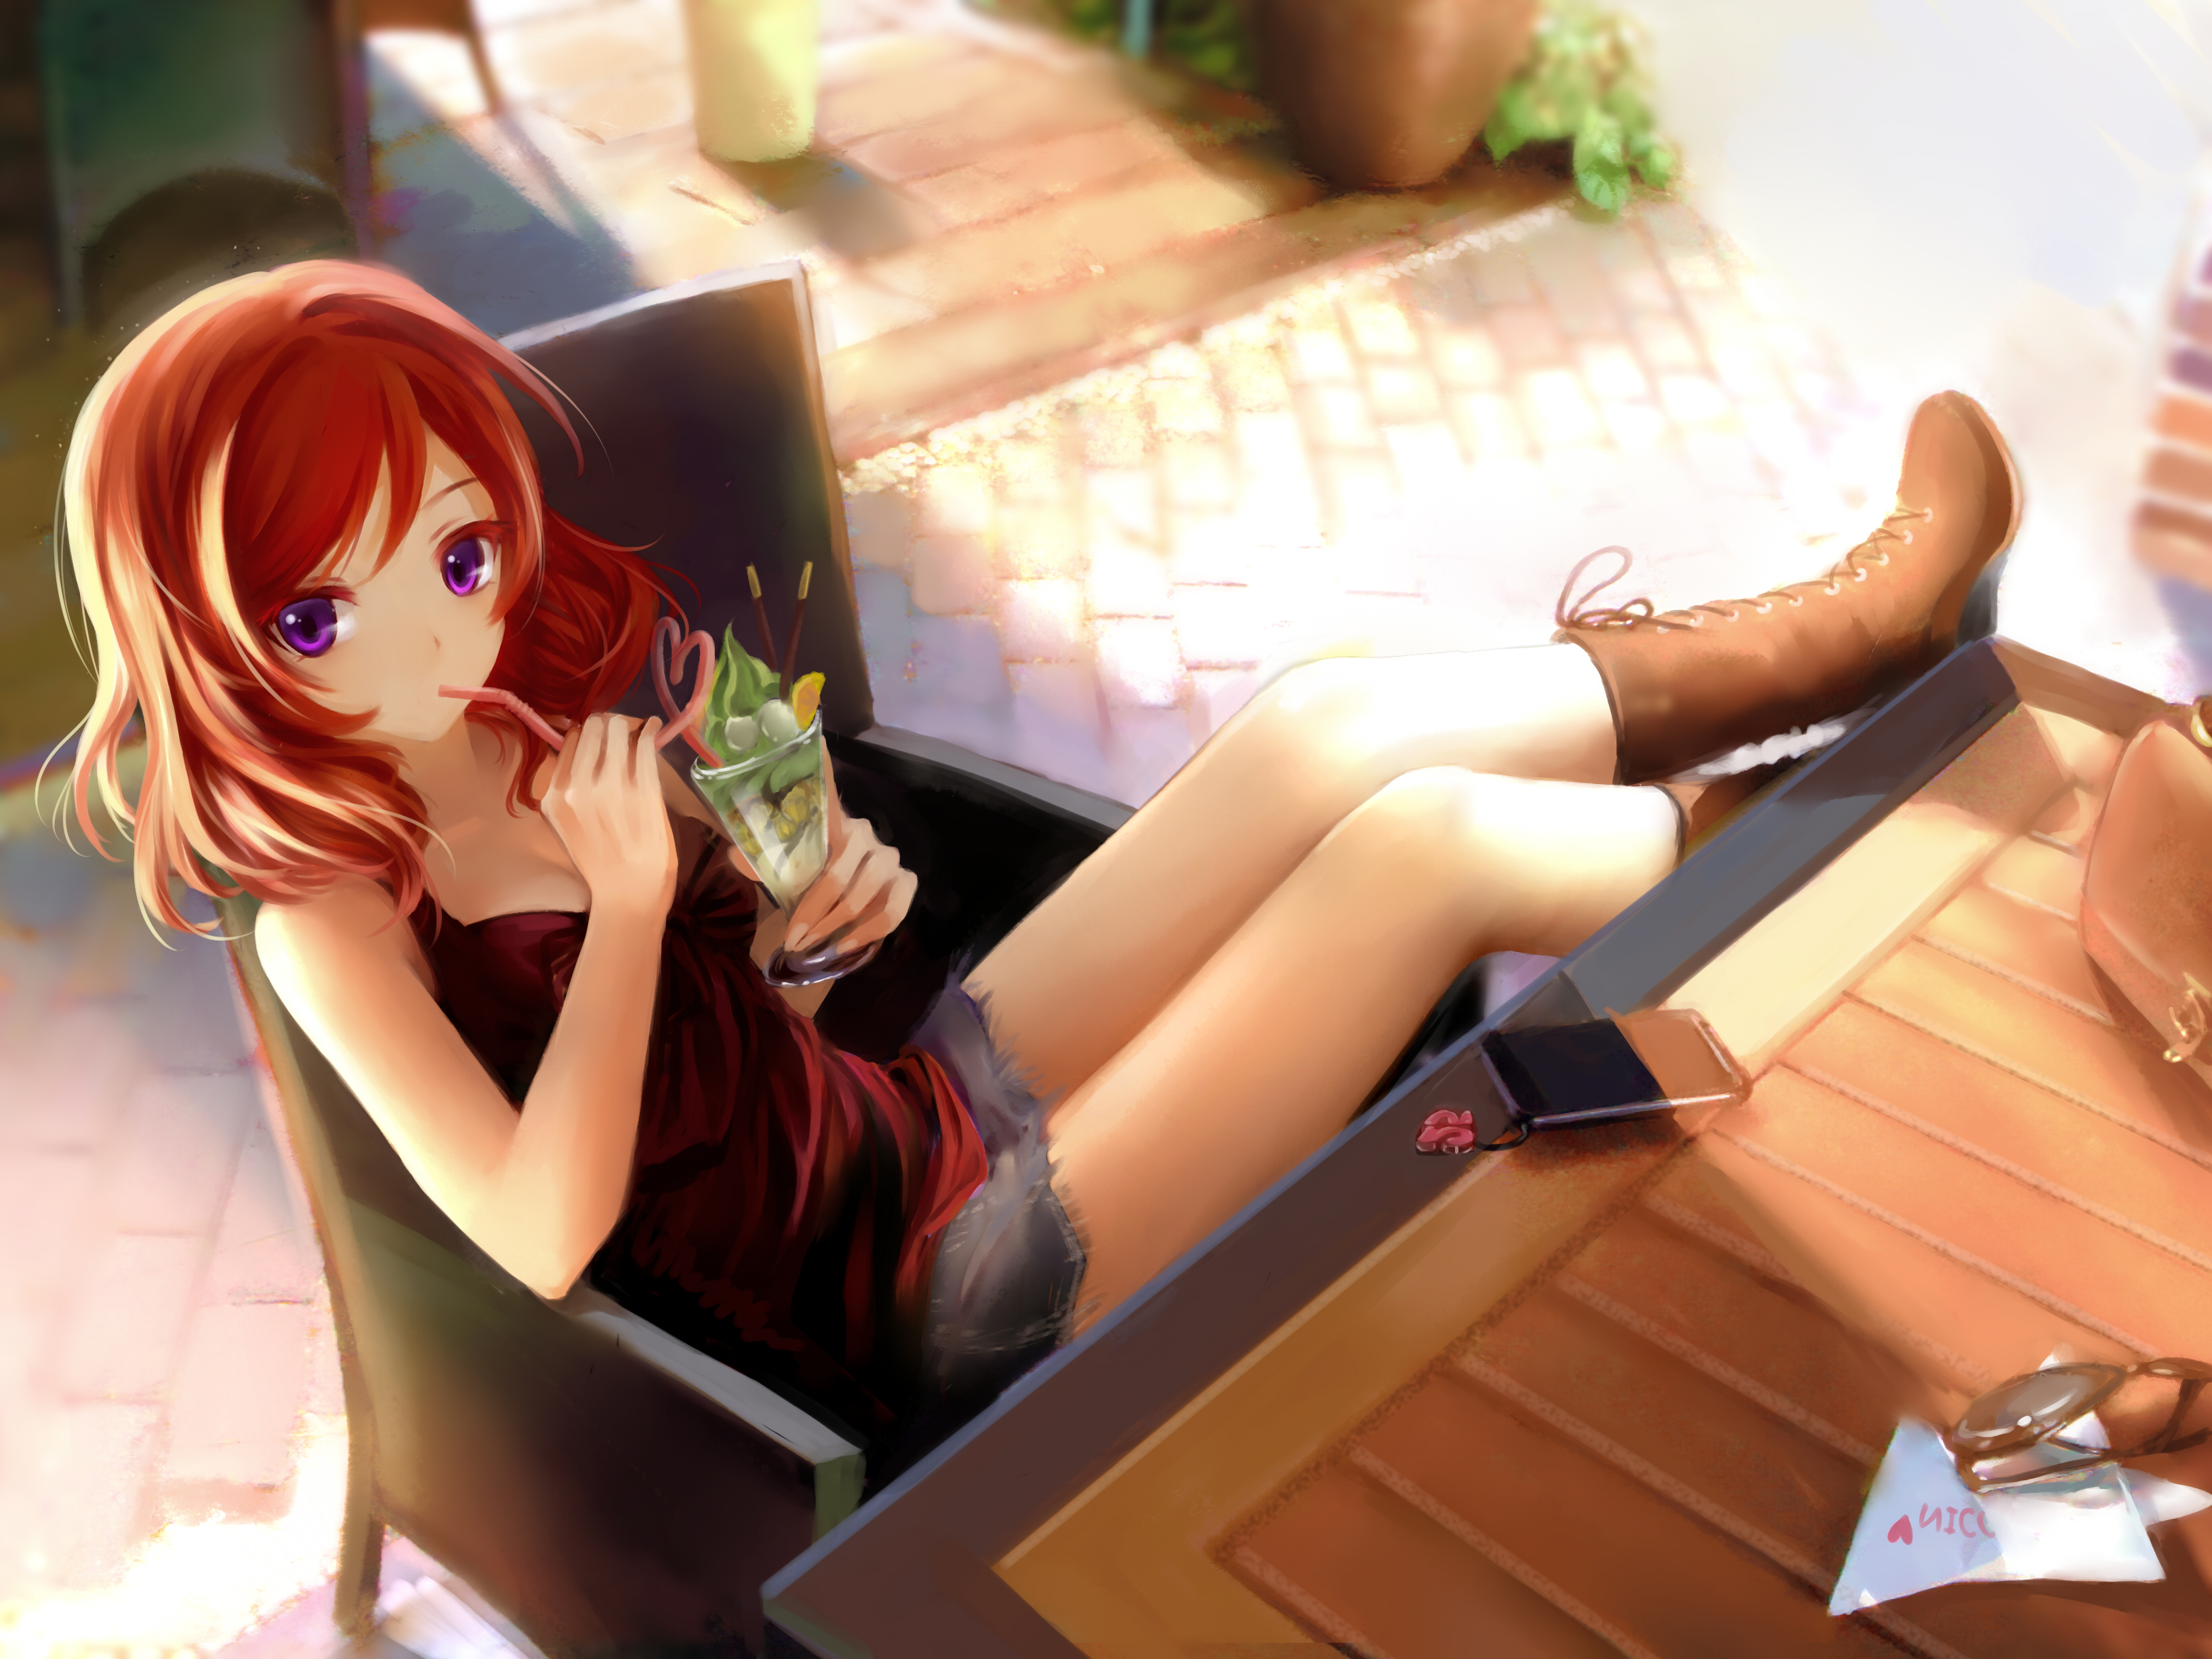 Anime 3264x2448 Nishikino Maki anime anime girls soft shading Love Live! purple eyes chair looking at viewer redhead long hair boots legs cocktails drinking food fruit Clouble